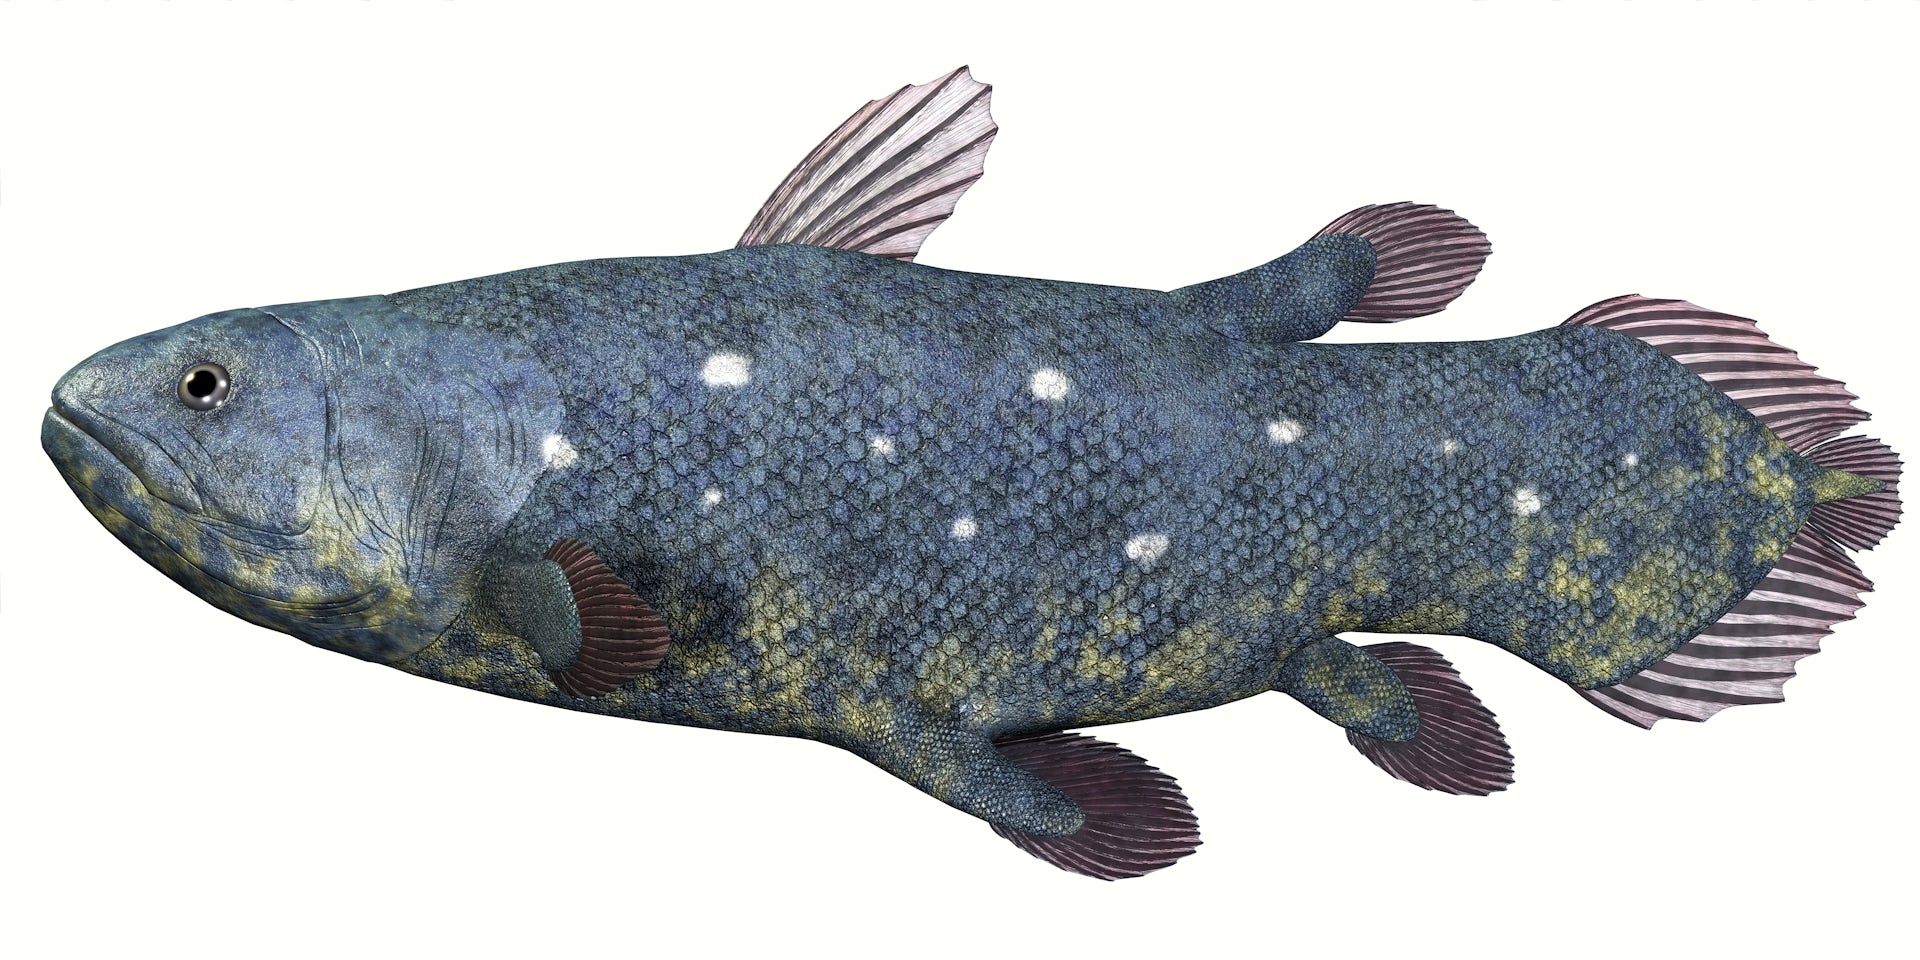 Coelacanth fish over white background